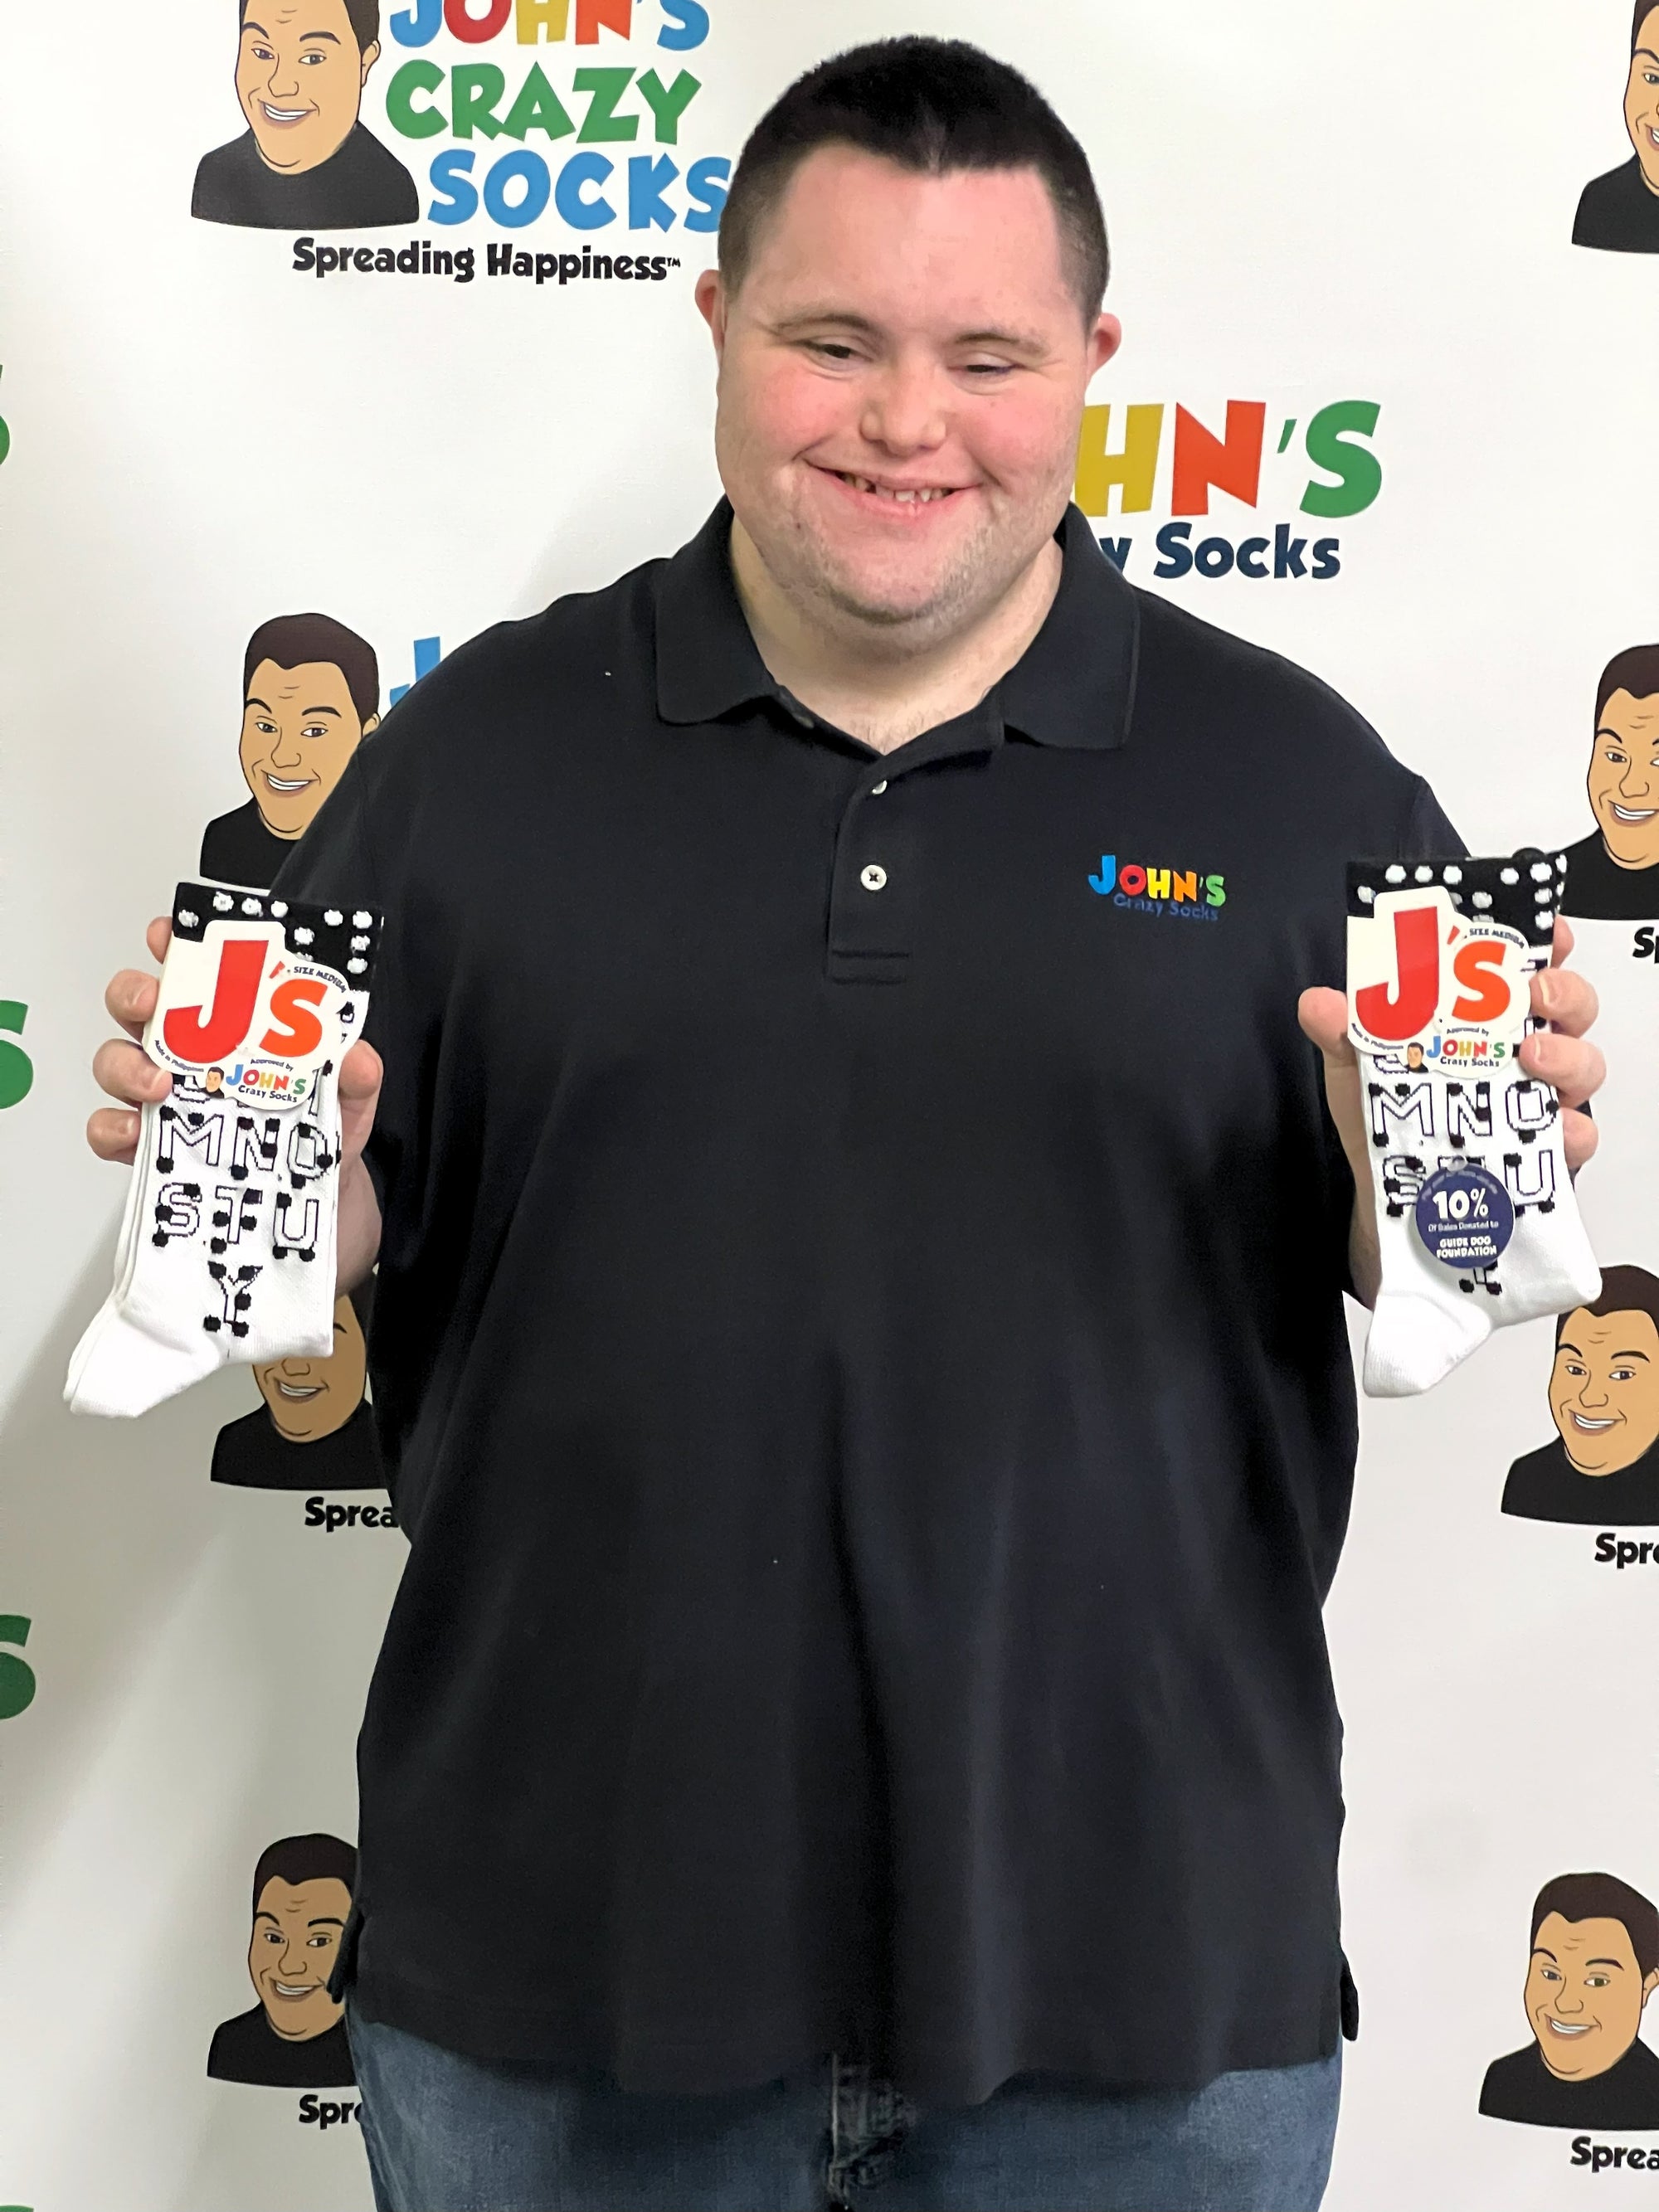 John’s Crazy Socks Introduces the World’s First Pair of Tactile Braille Socks